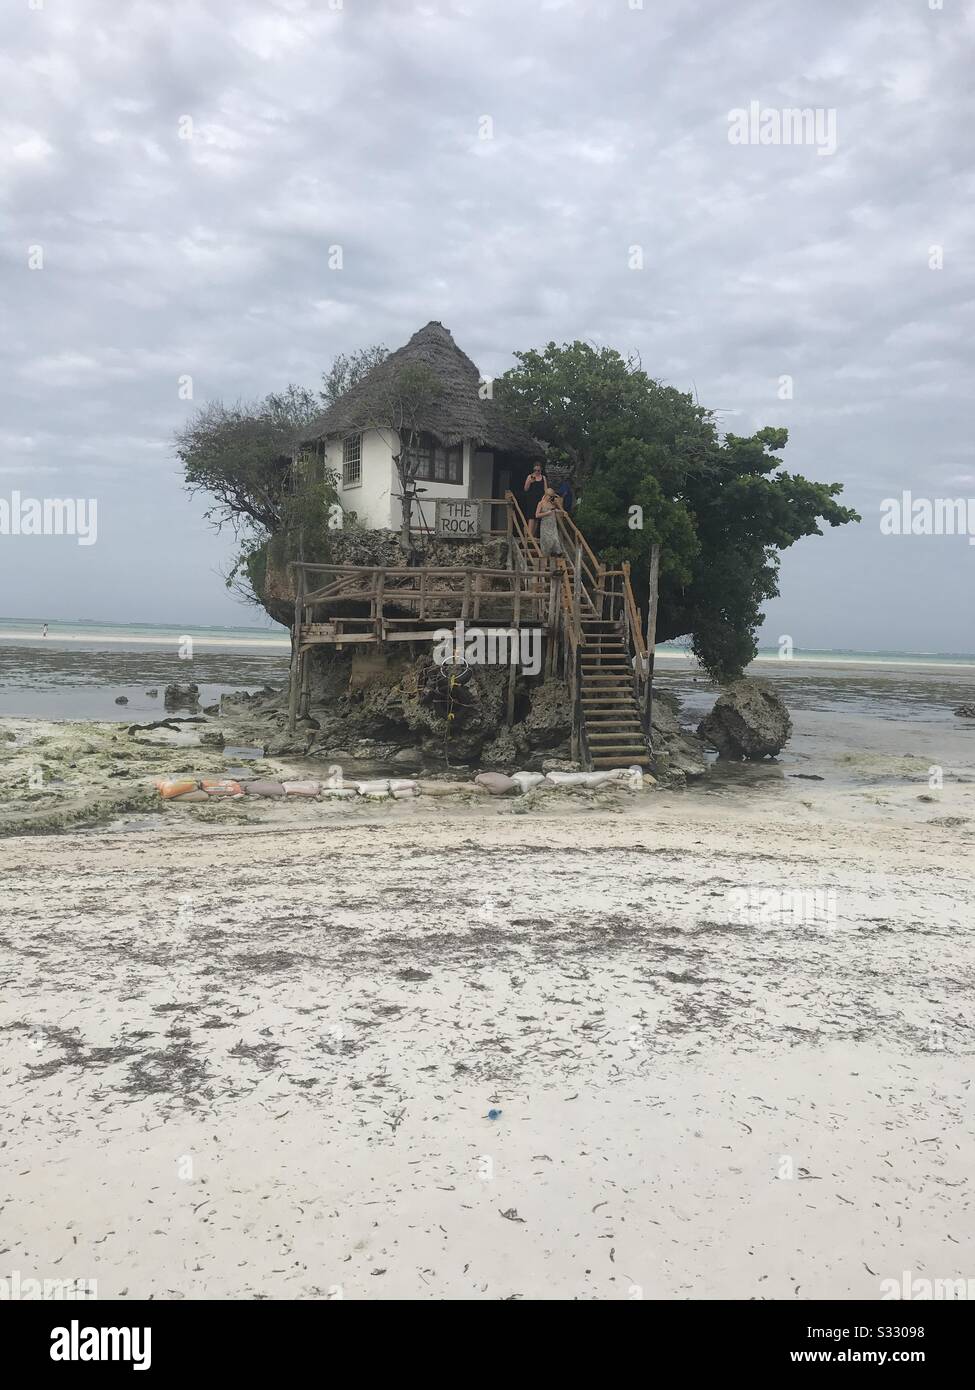 The Rock: a tiny island at east of Zanzibar island, people can walk to it on low tide, contains a restaurant and couple of trees. Stock Photo